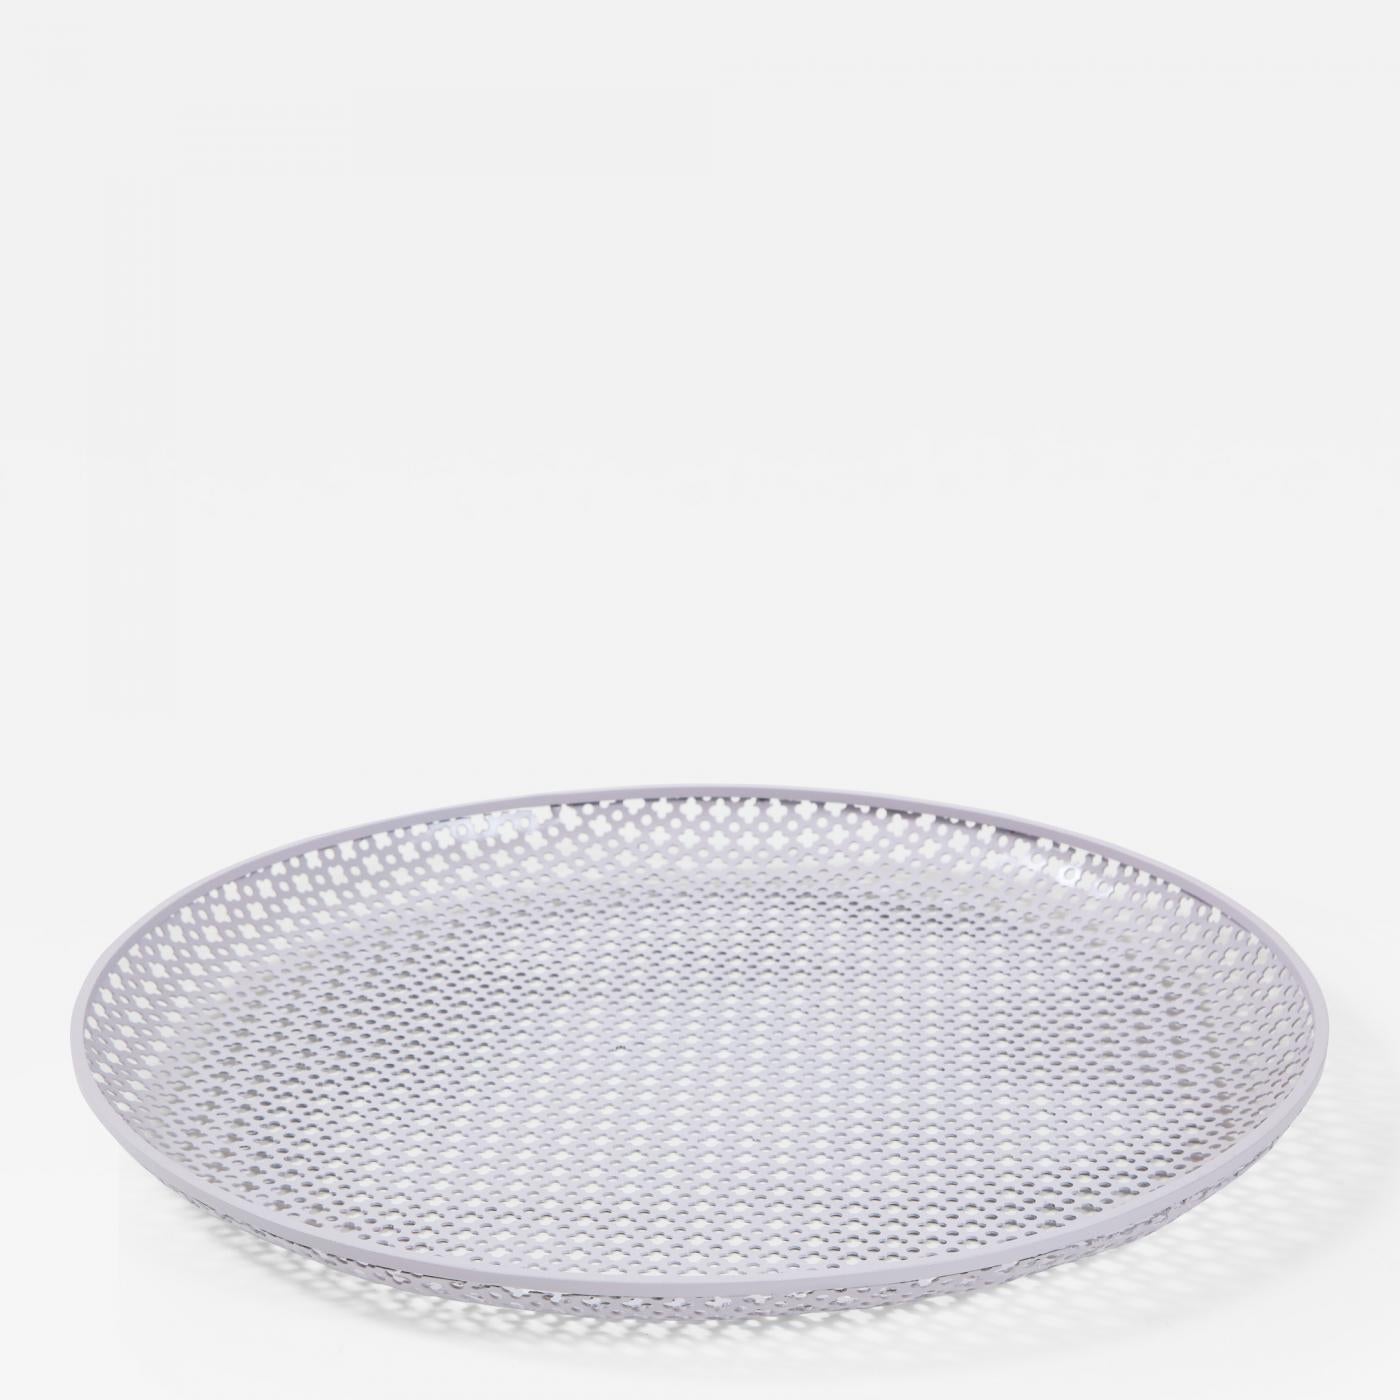 Exquisite white round perforated metal tray by Mathieu Matégot, France, circa 1950s.

